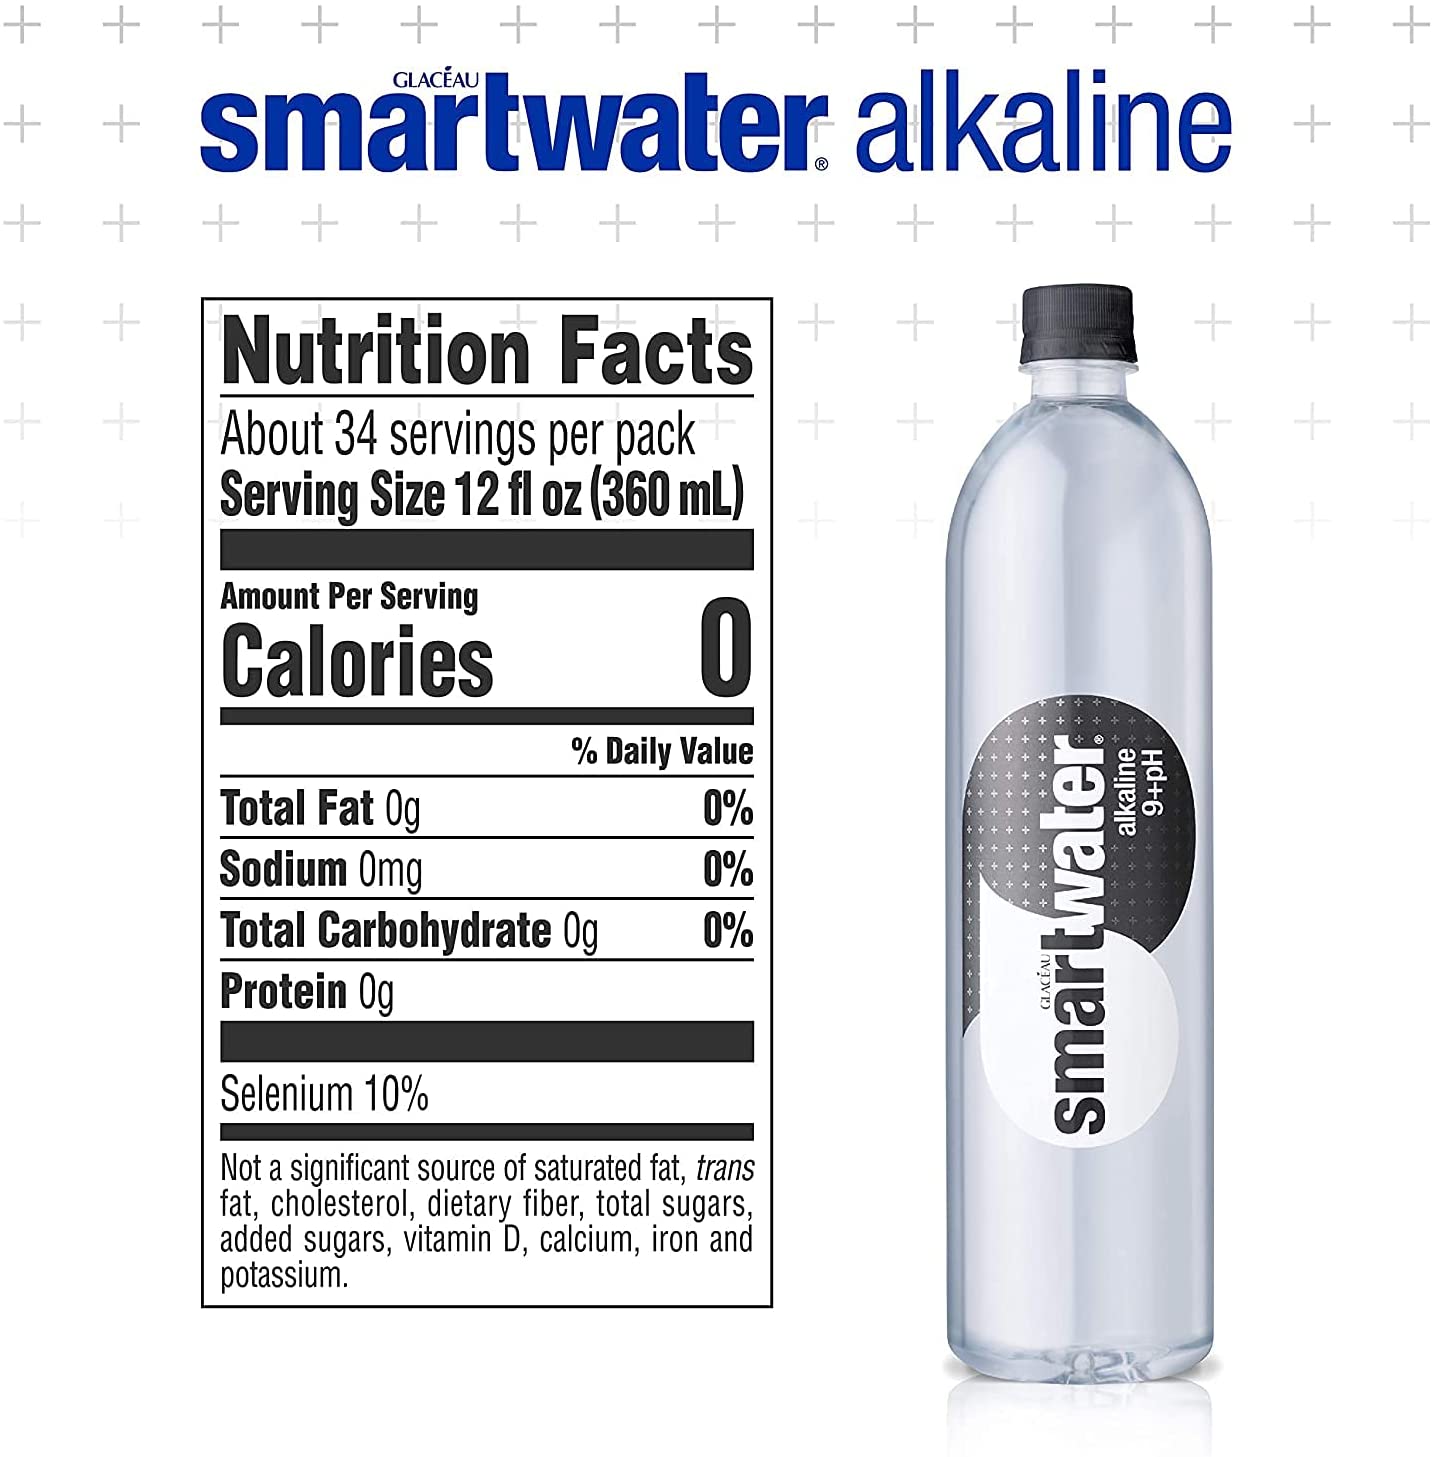 Smart Water, Mineralized Treated Water with Alkaline 9+ph 1 Liter